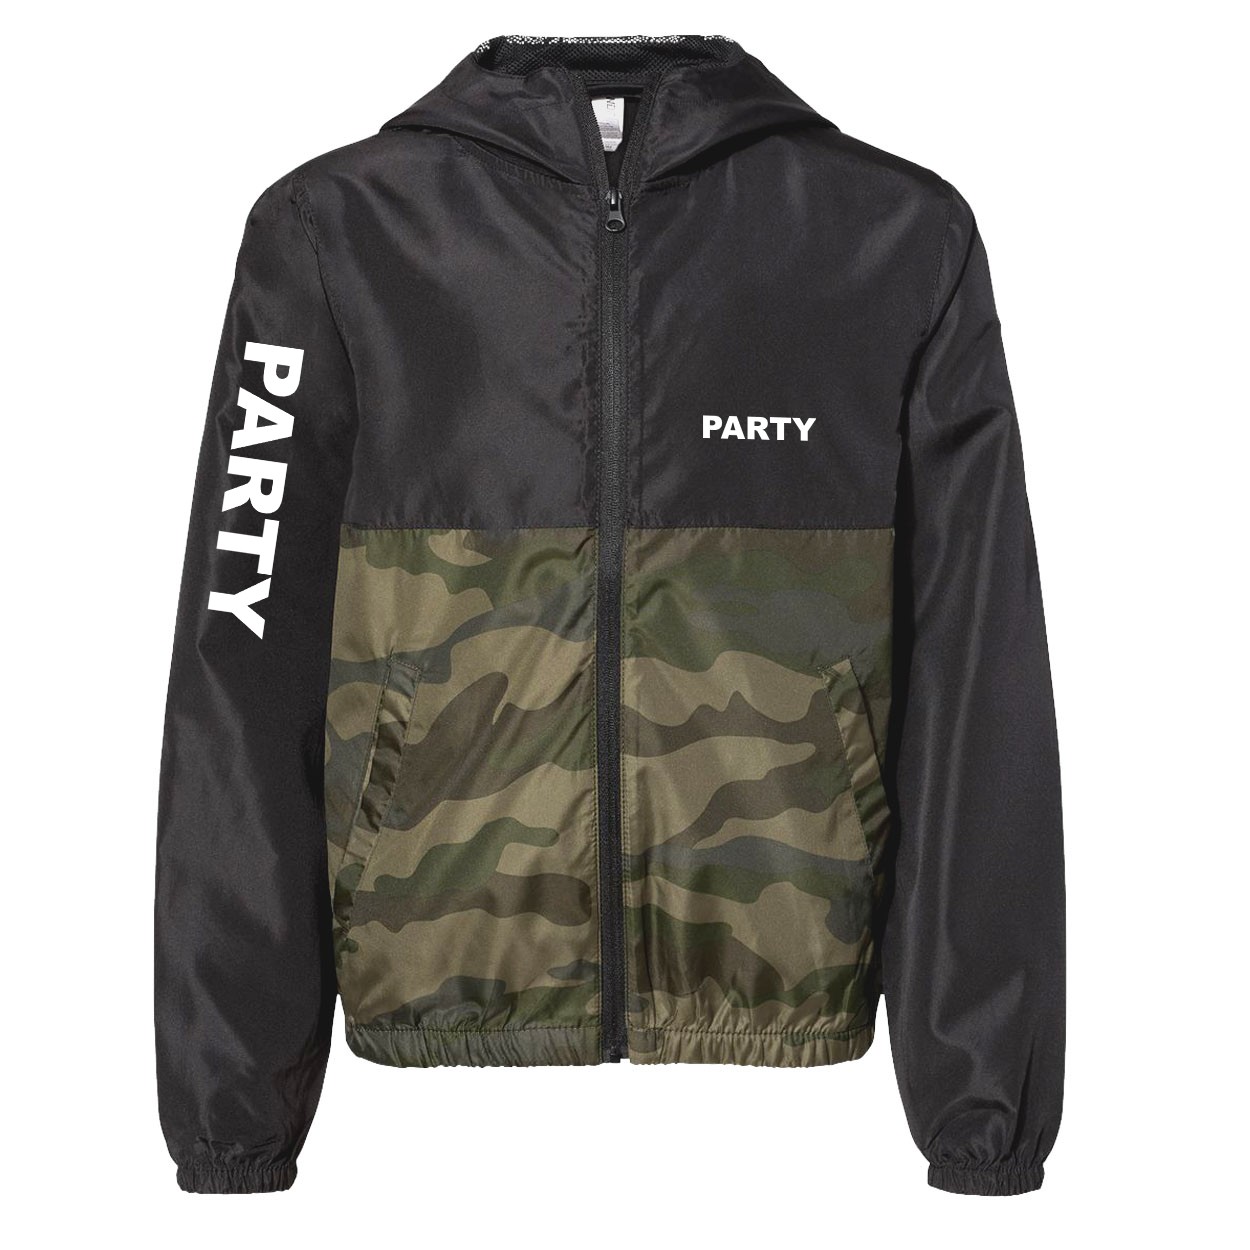 Party Brand Logo Classic Youth Lightweight Windbreaker Black/Forest Camo